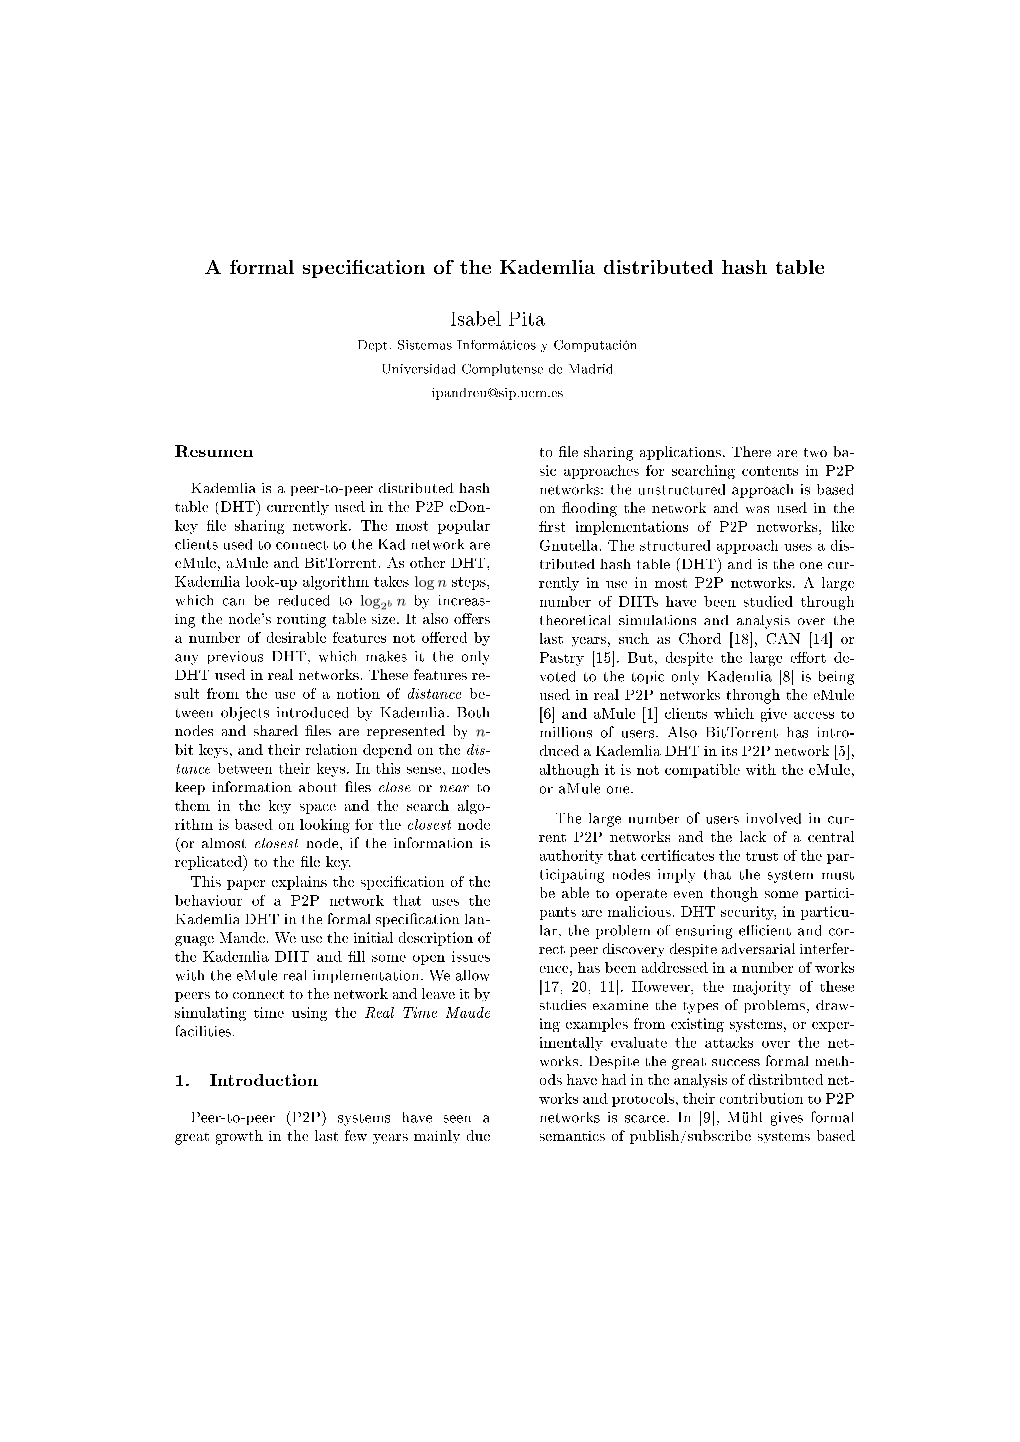 A Formal Specification of the Kademlia Distributed Hash Table